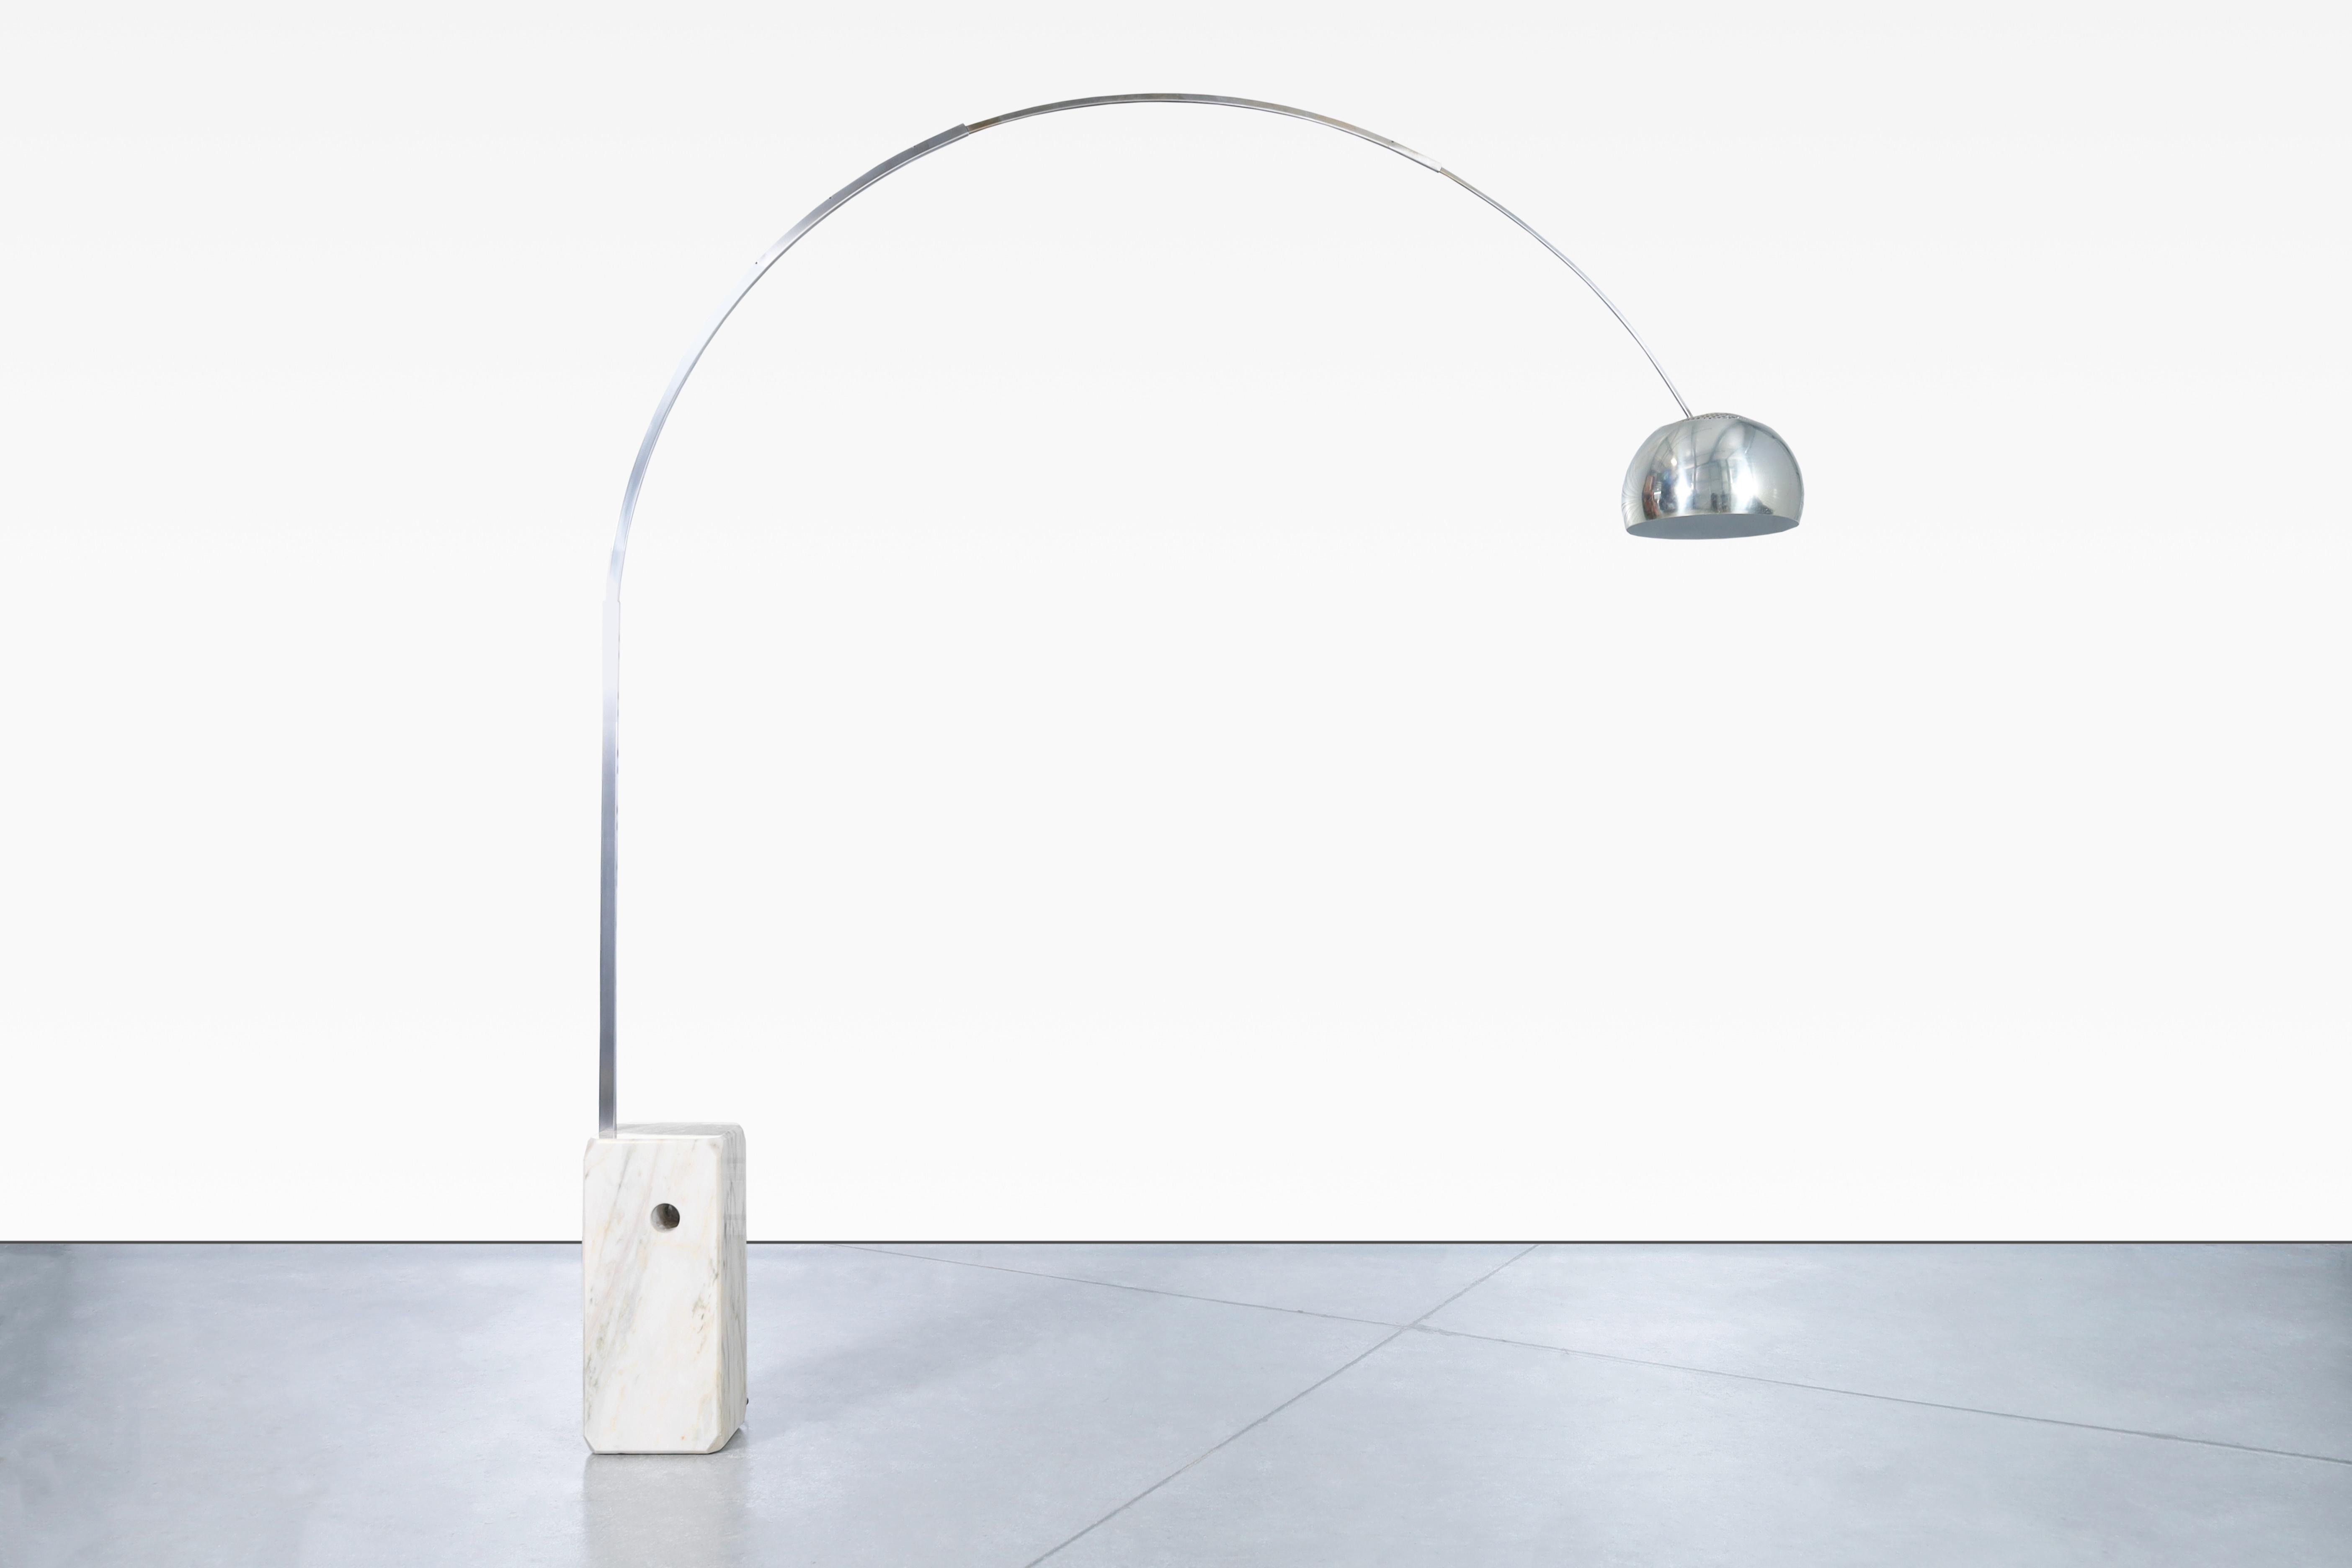 Amazing vintage Italian “Arco” marble floor lamps, designed by Achille and Pier Castiglioni for Flos in Italy, circa 1960s. This stunning lamp is a testament to refined design, showcasing a beautiful Carrera marble base and a fusion of aluminum and